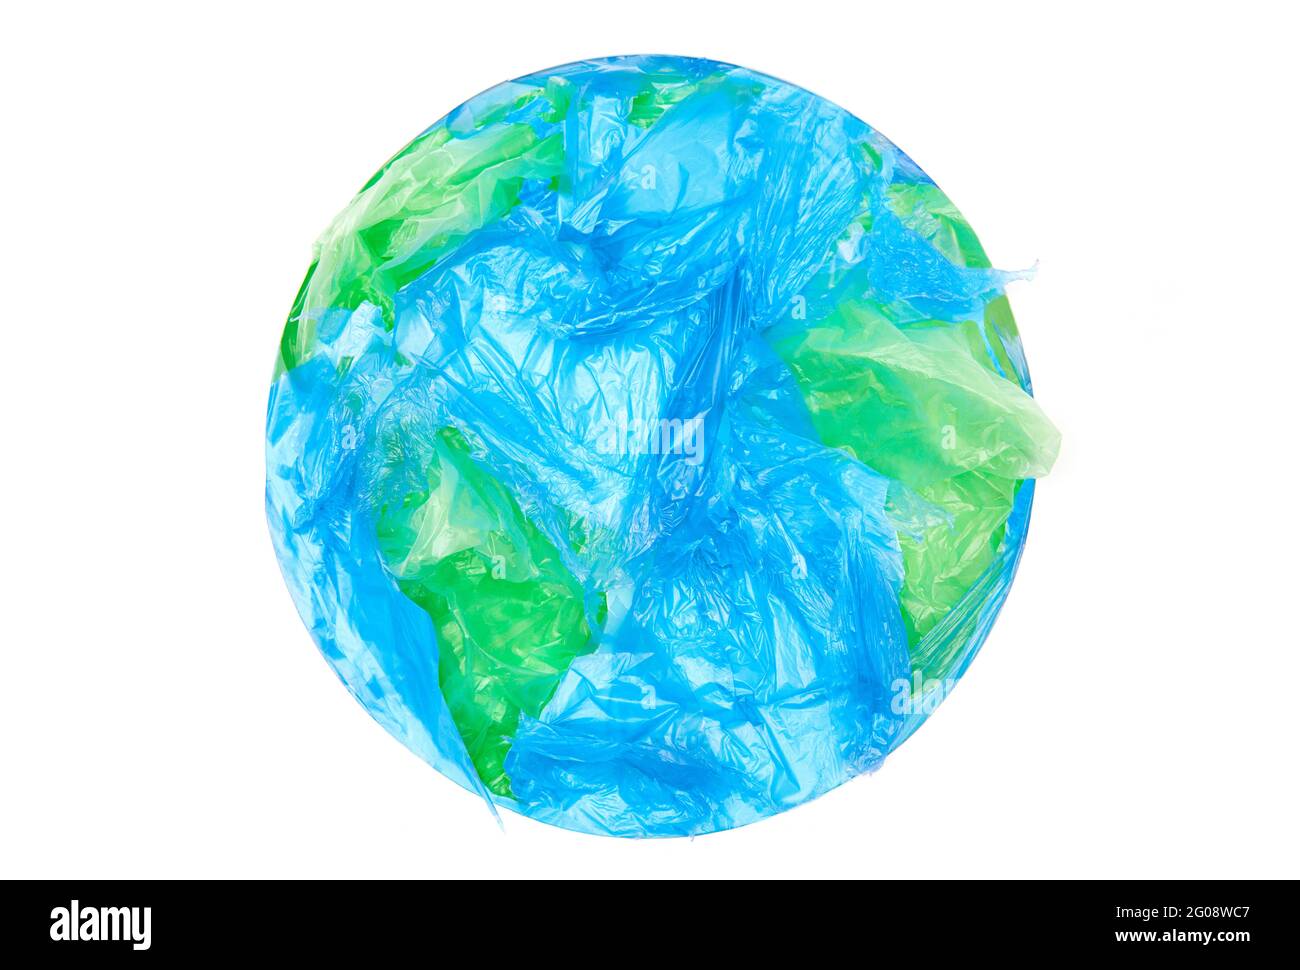 Earth globe made of green and blue plastic bags. Plastic pollution concept. Stock Photo